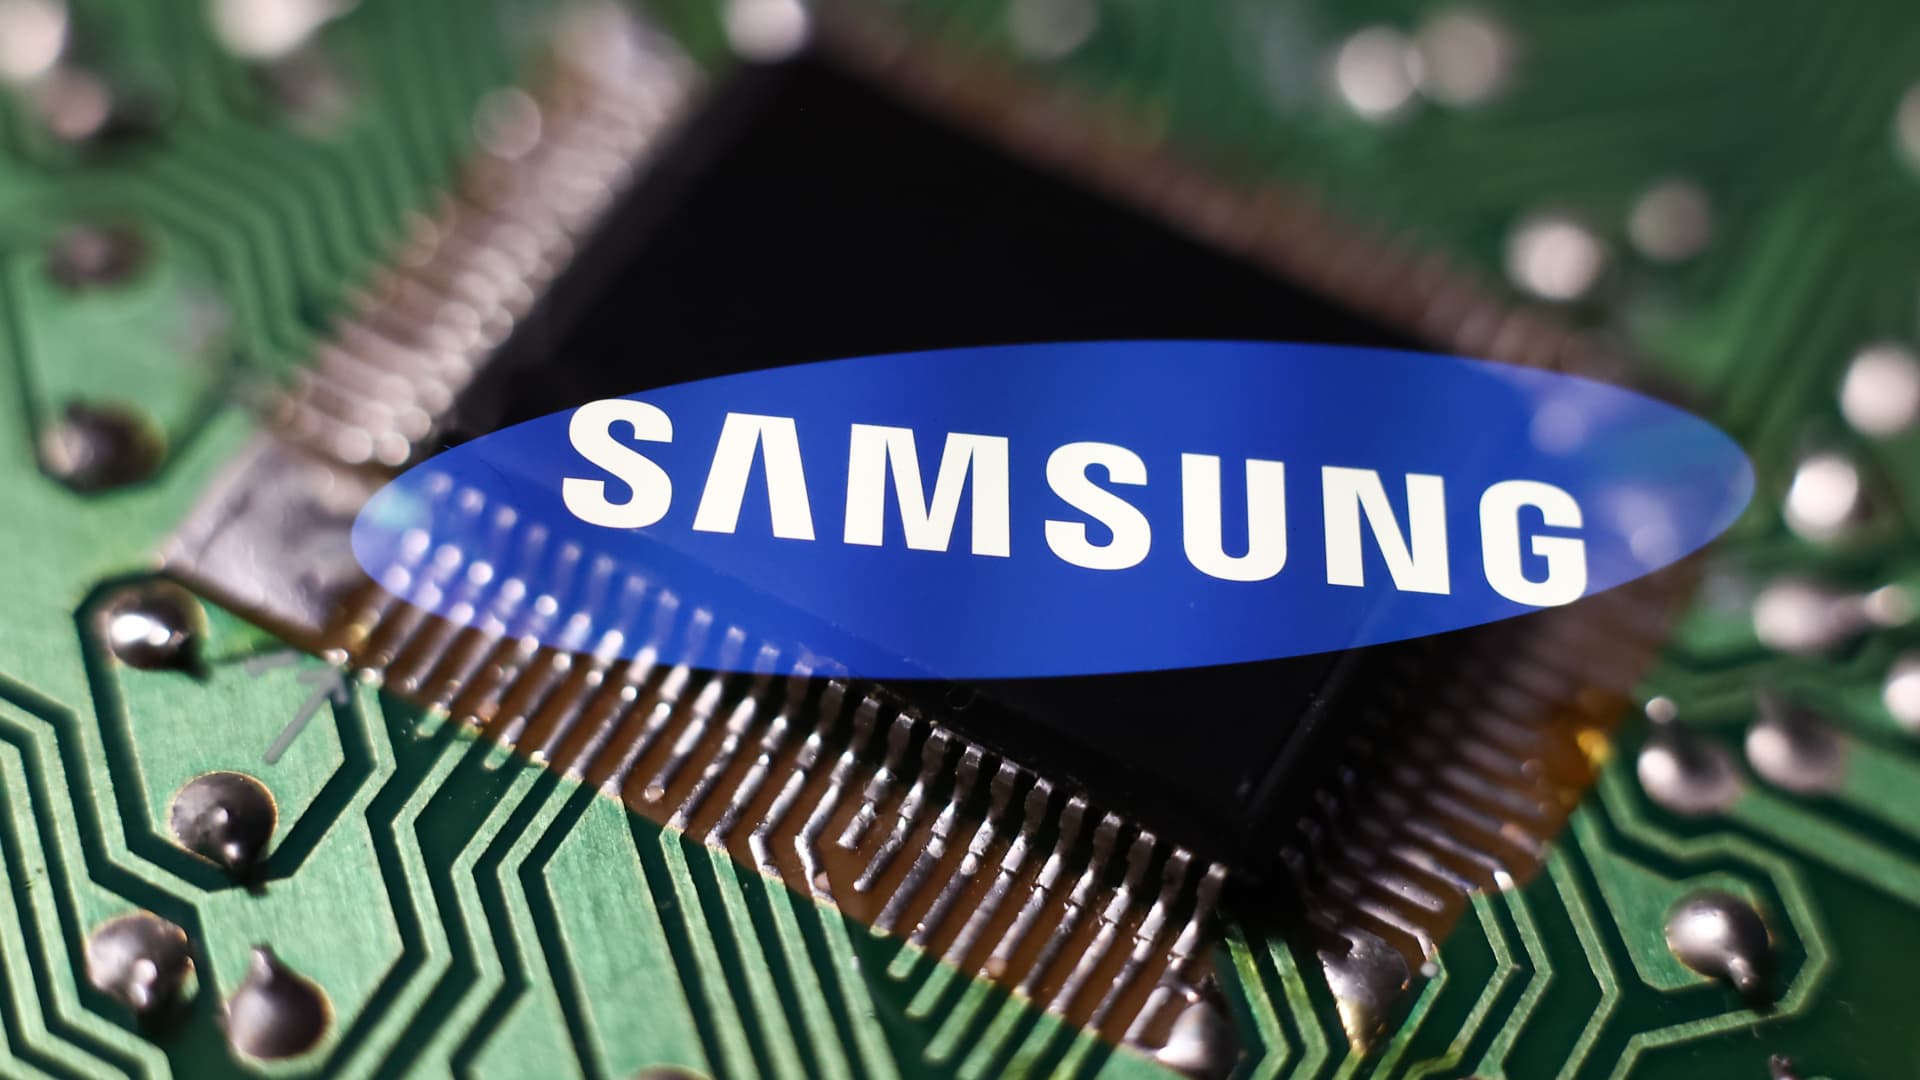 Samsung Electronics names new semiconductor chief as AI chip race heats up